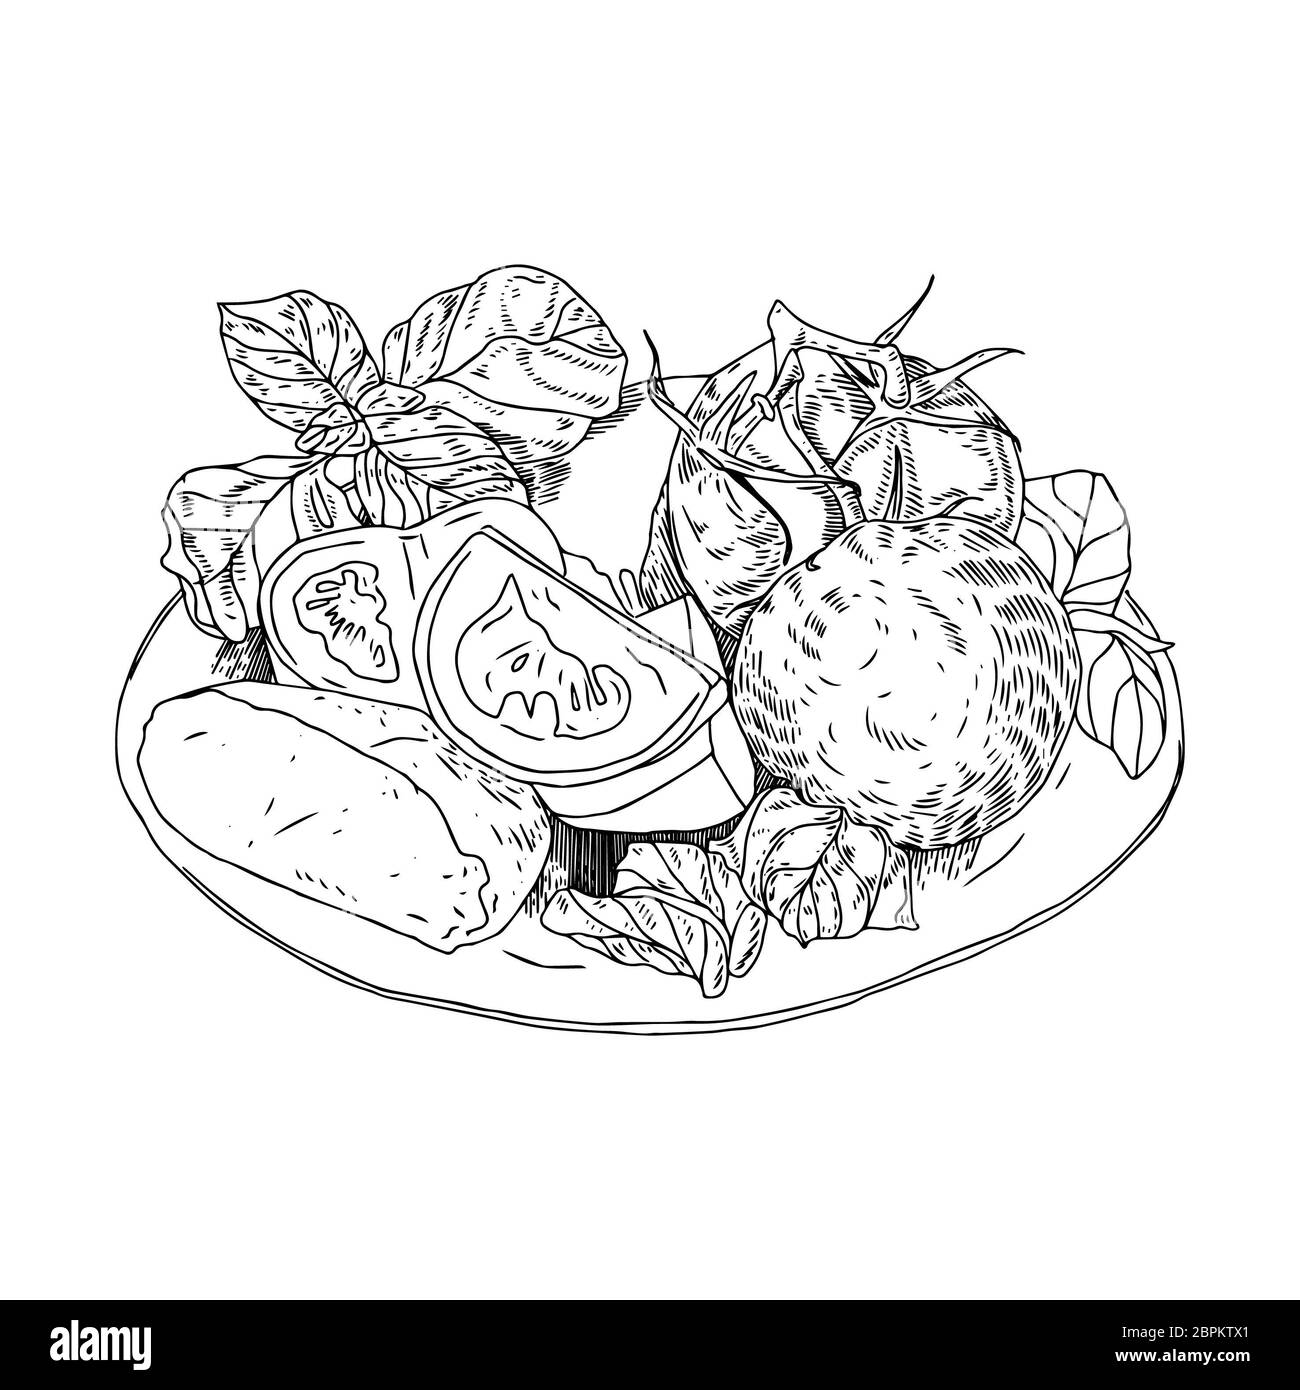 Greek salad with fresh vegetables, feta cheese and olive oil. Watercolor hand drawn illustration Stock Photo